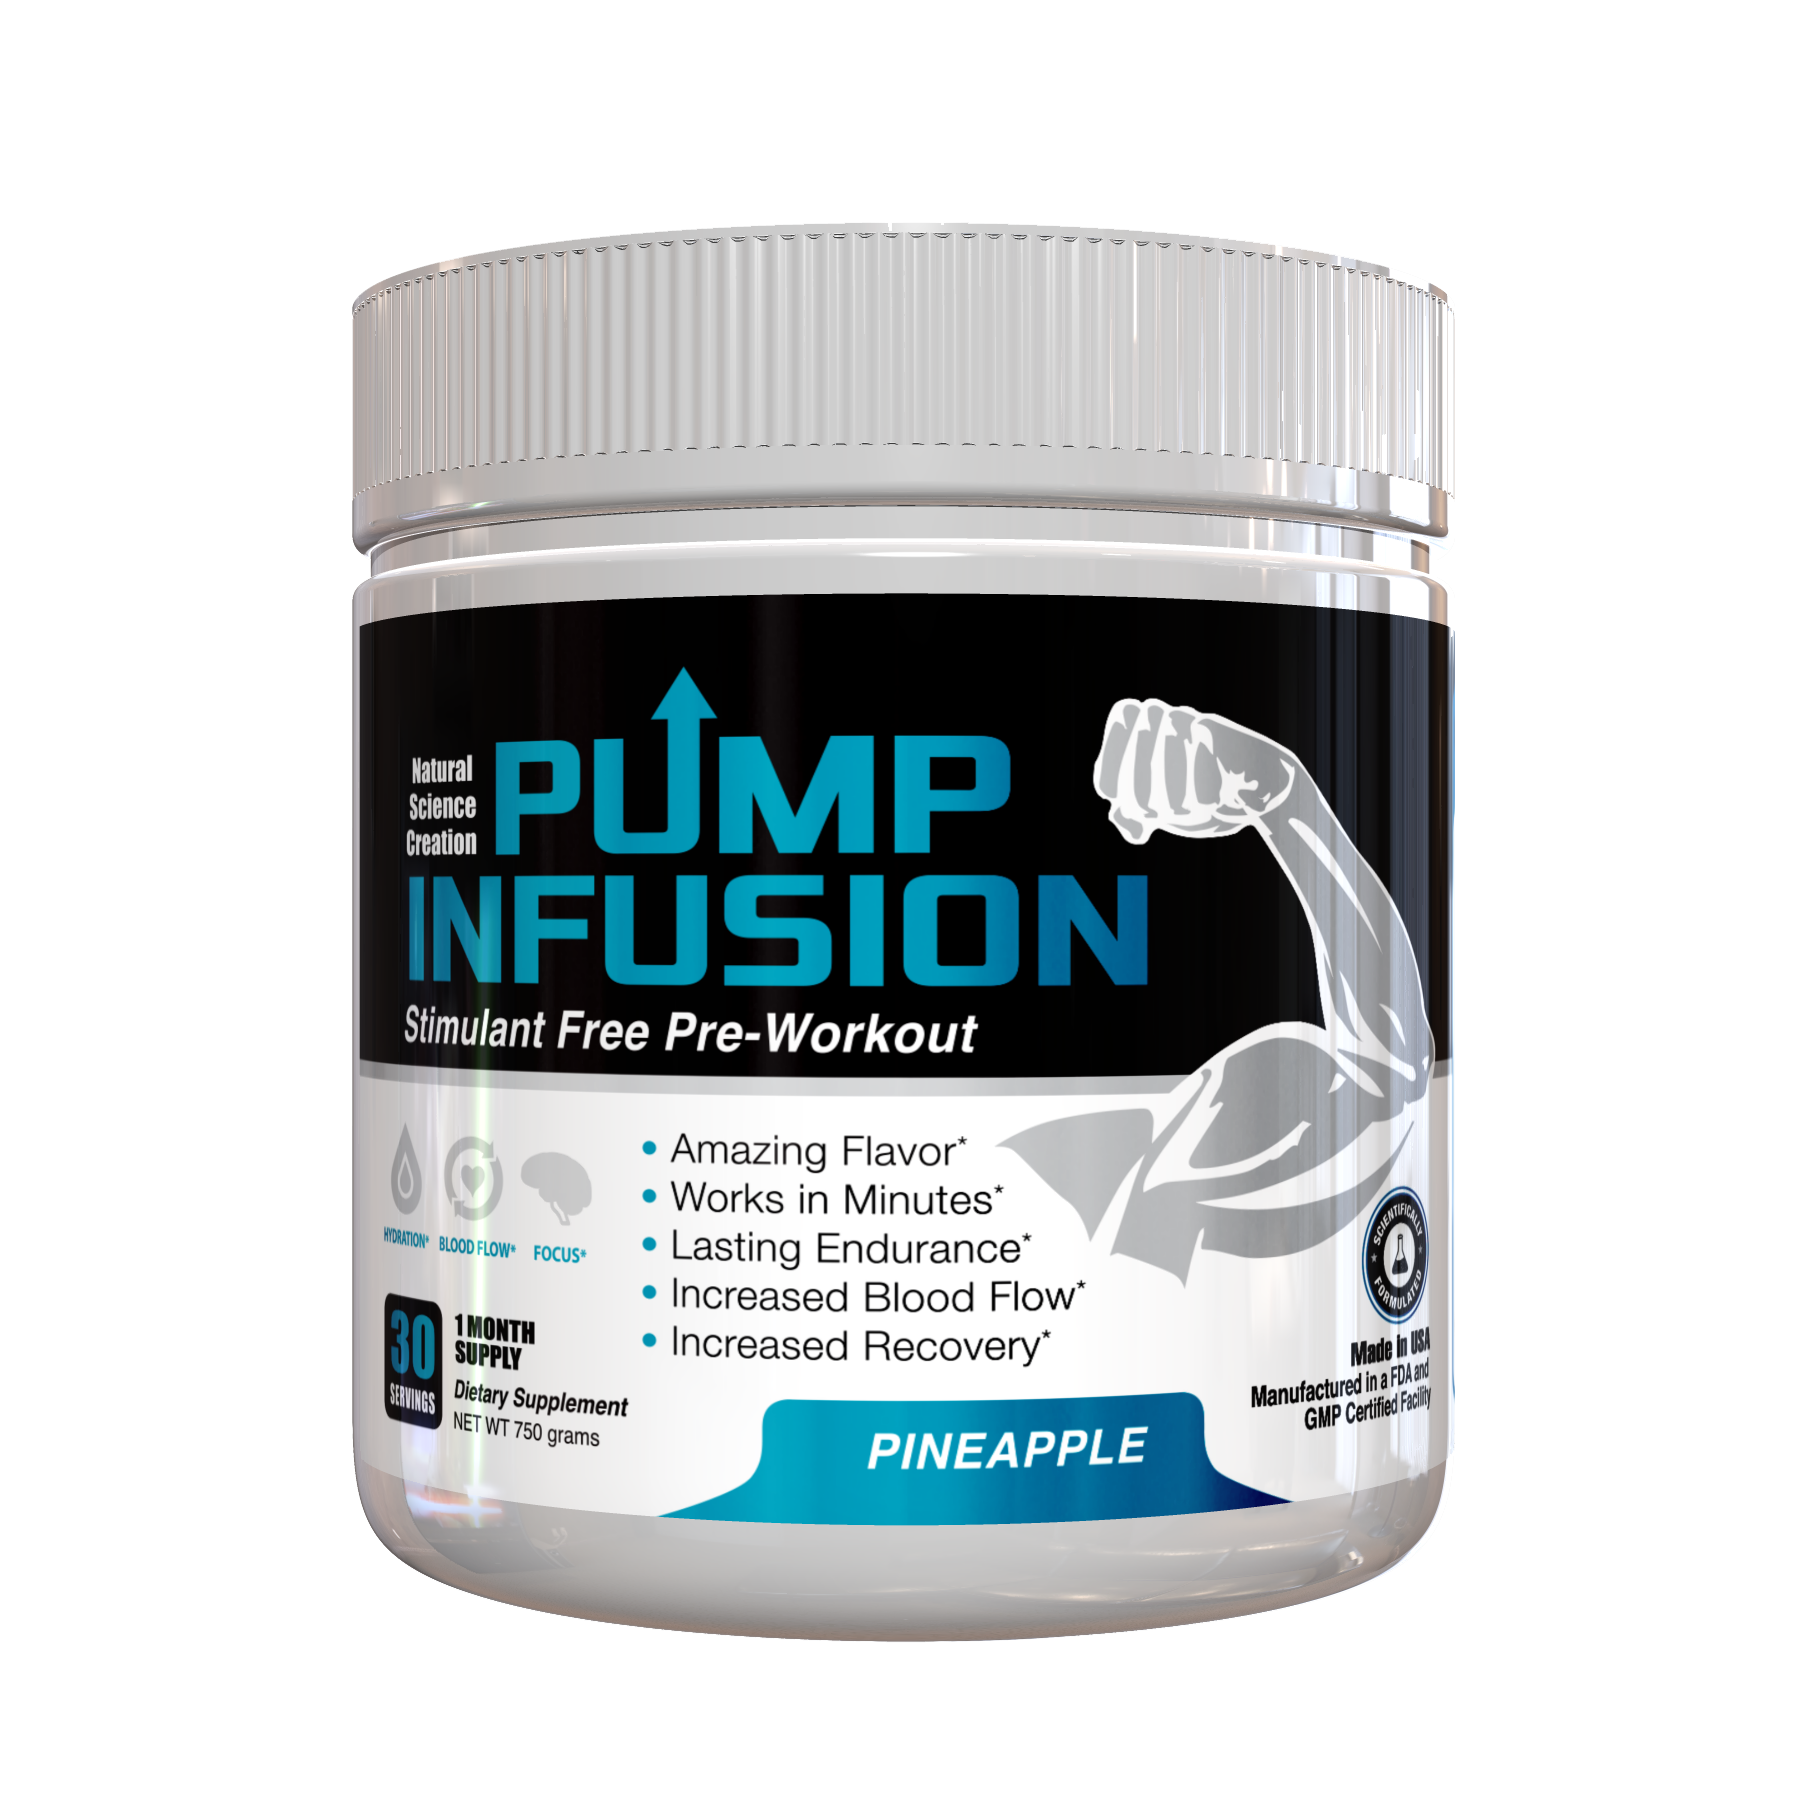 NEW! Pump Infusion Pineapple (Stimulant Pre-Workout)